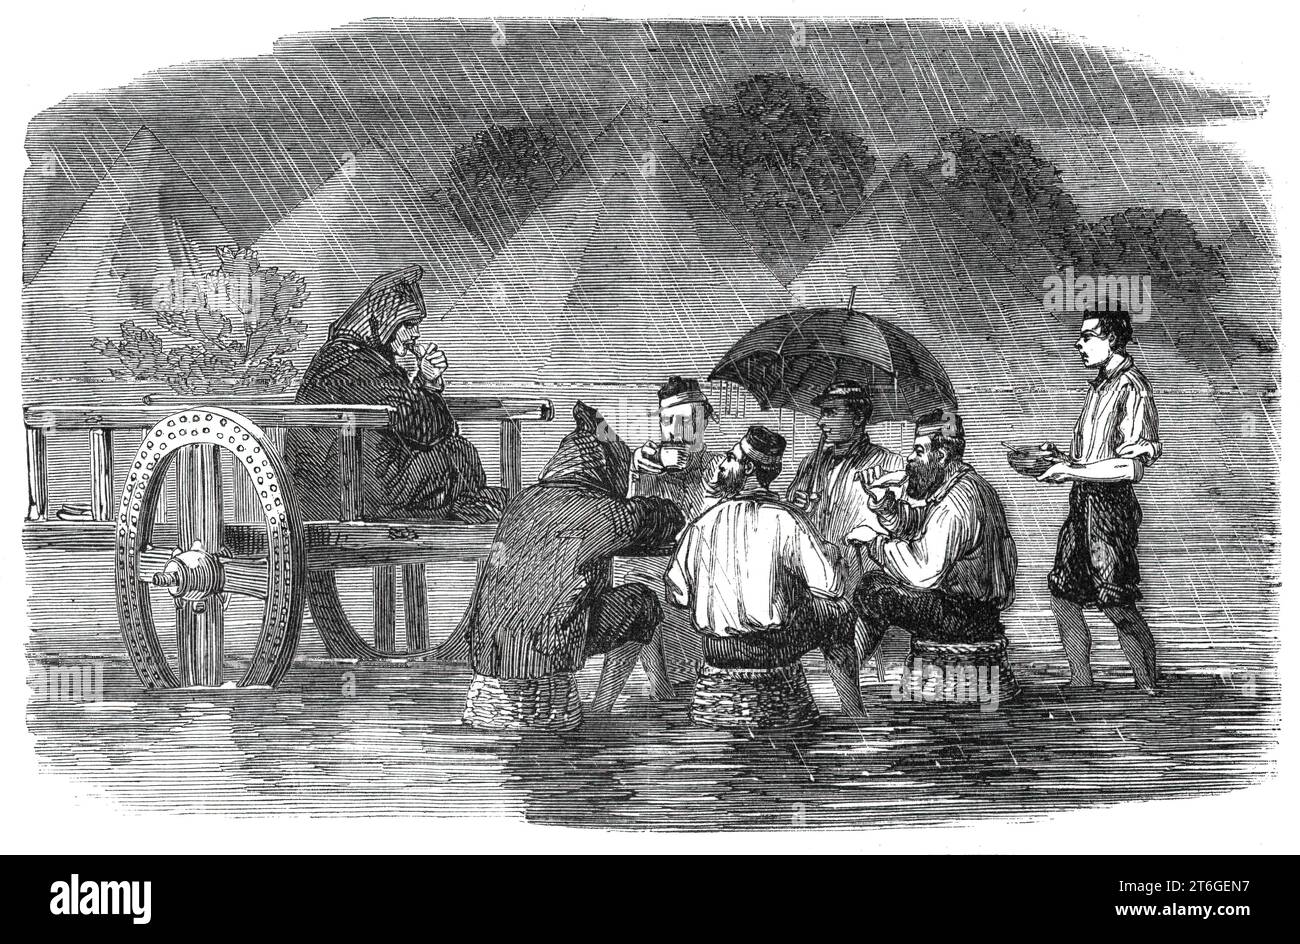 Dining under difficulties - from a sketch by our special artist in China, 1860. British forces in the Far East. From &quot;Illustrated London News&quot;, 1860. Stock Photo